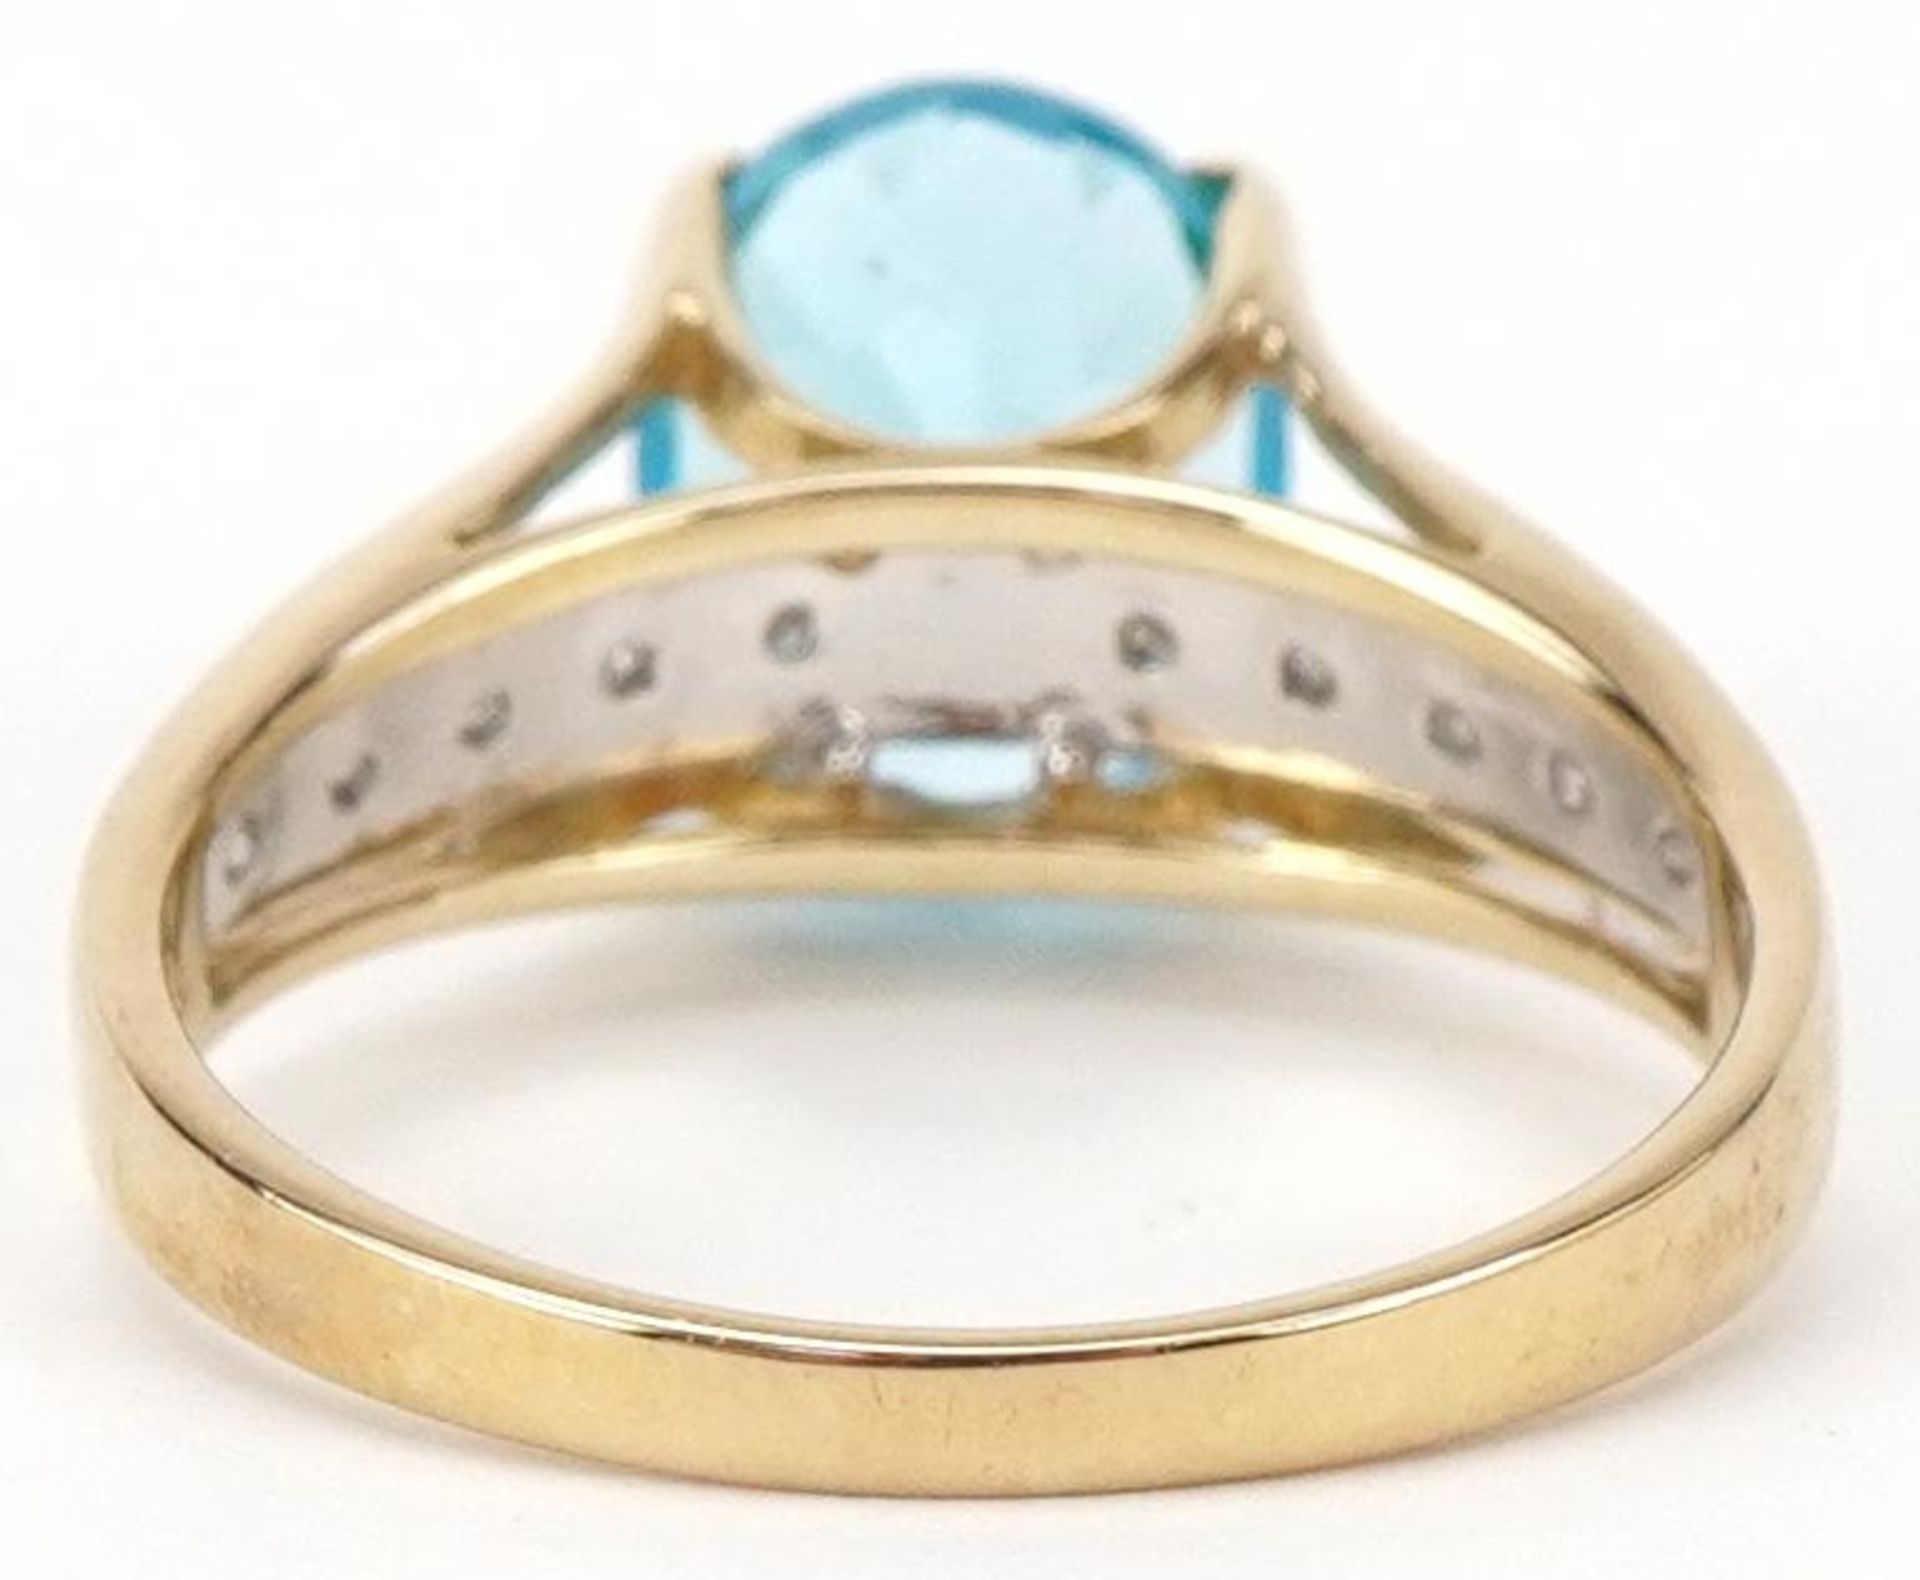 9ct gold blue topaz solitaire ring with diamond set shoulders, size P/Q, 3.3g - Image 2 of 5